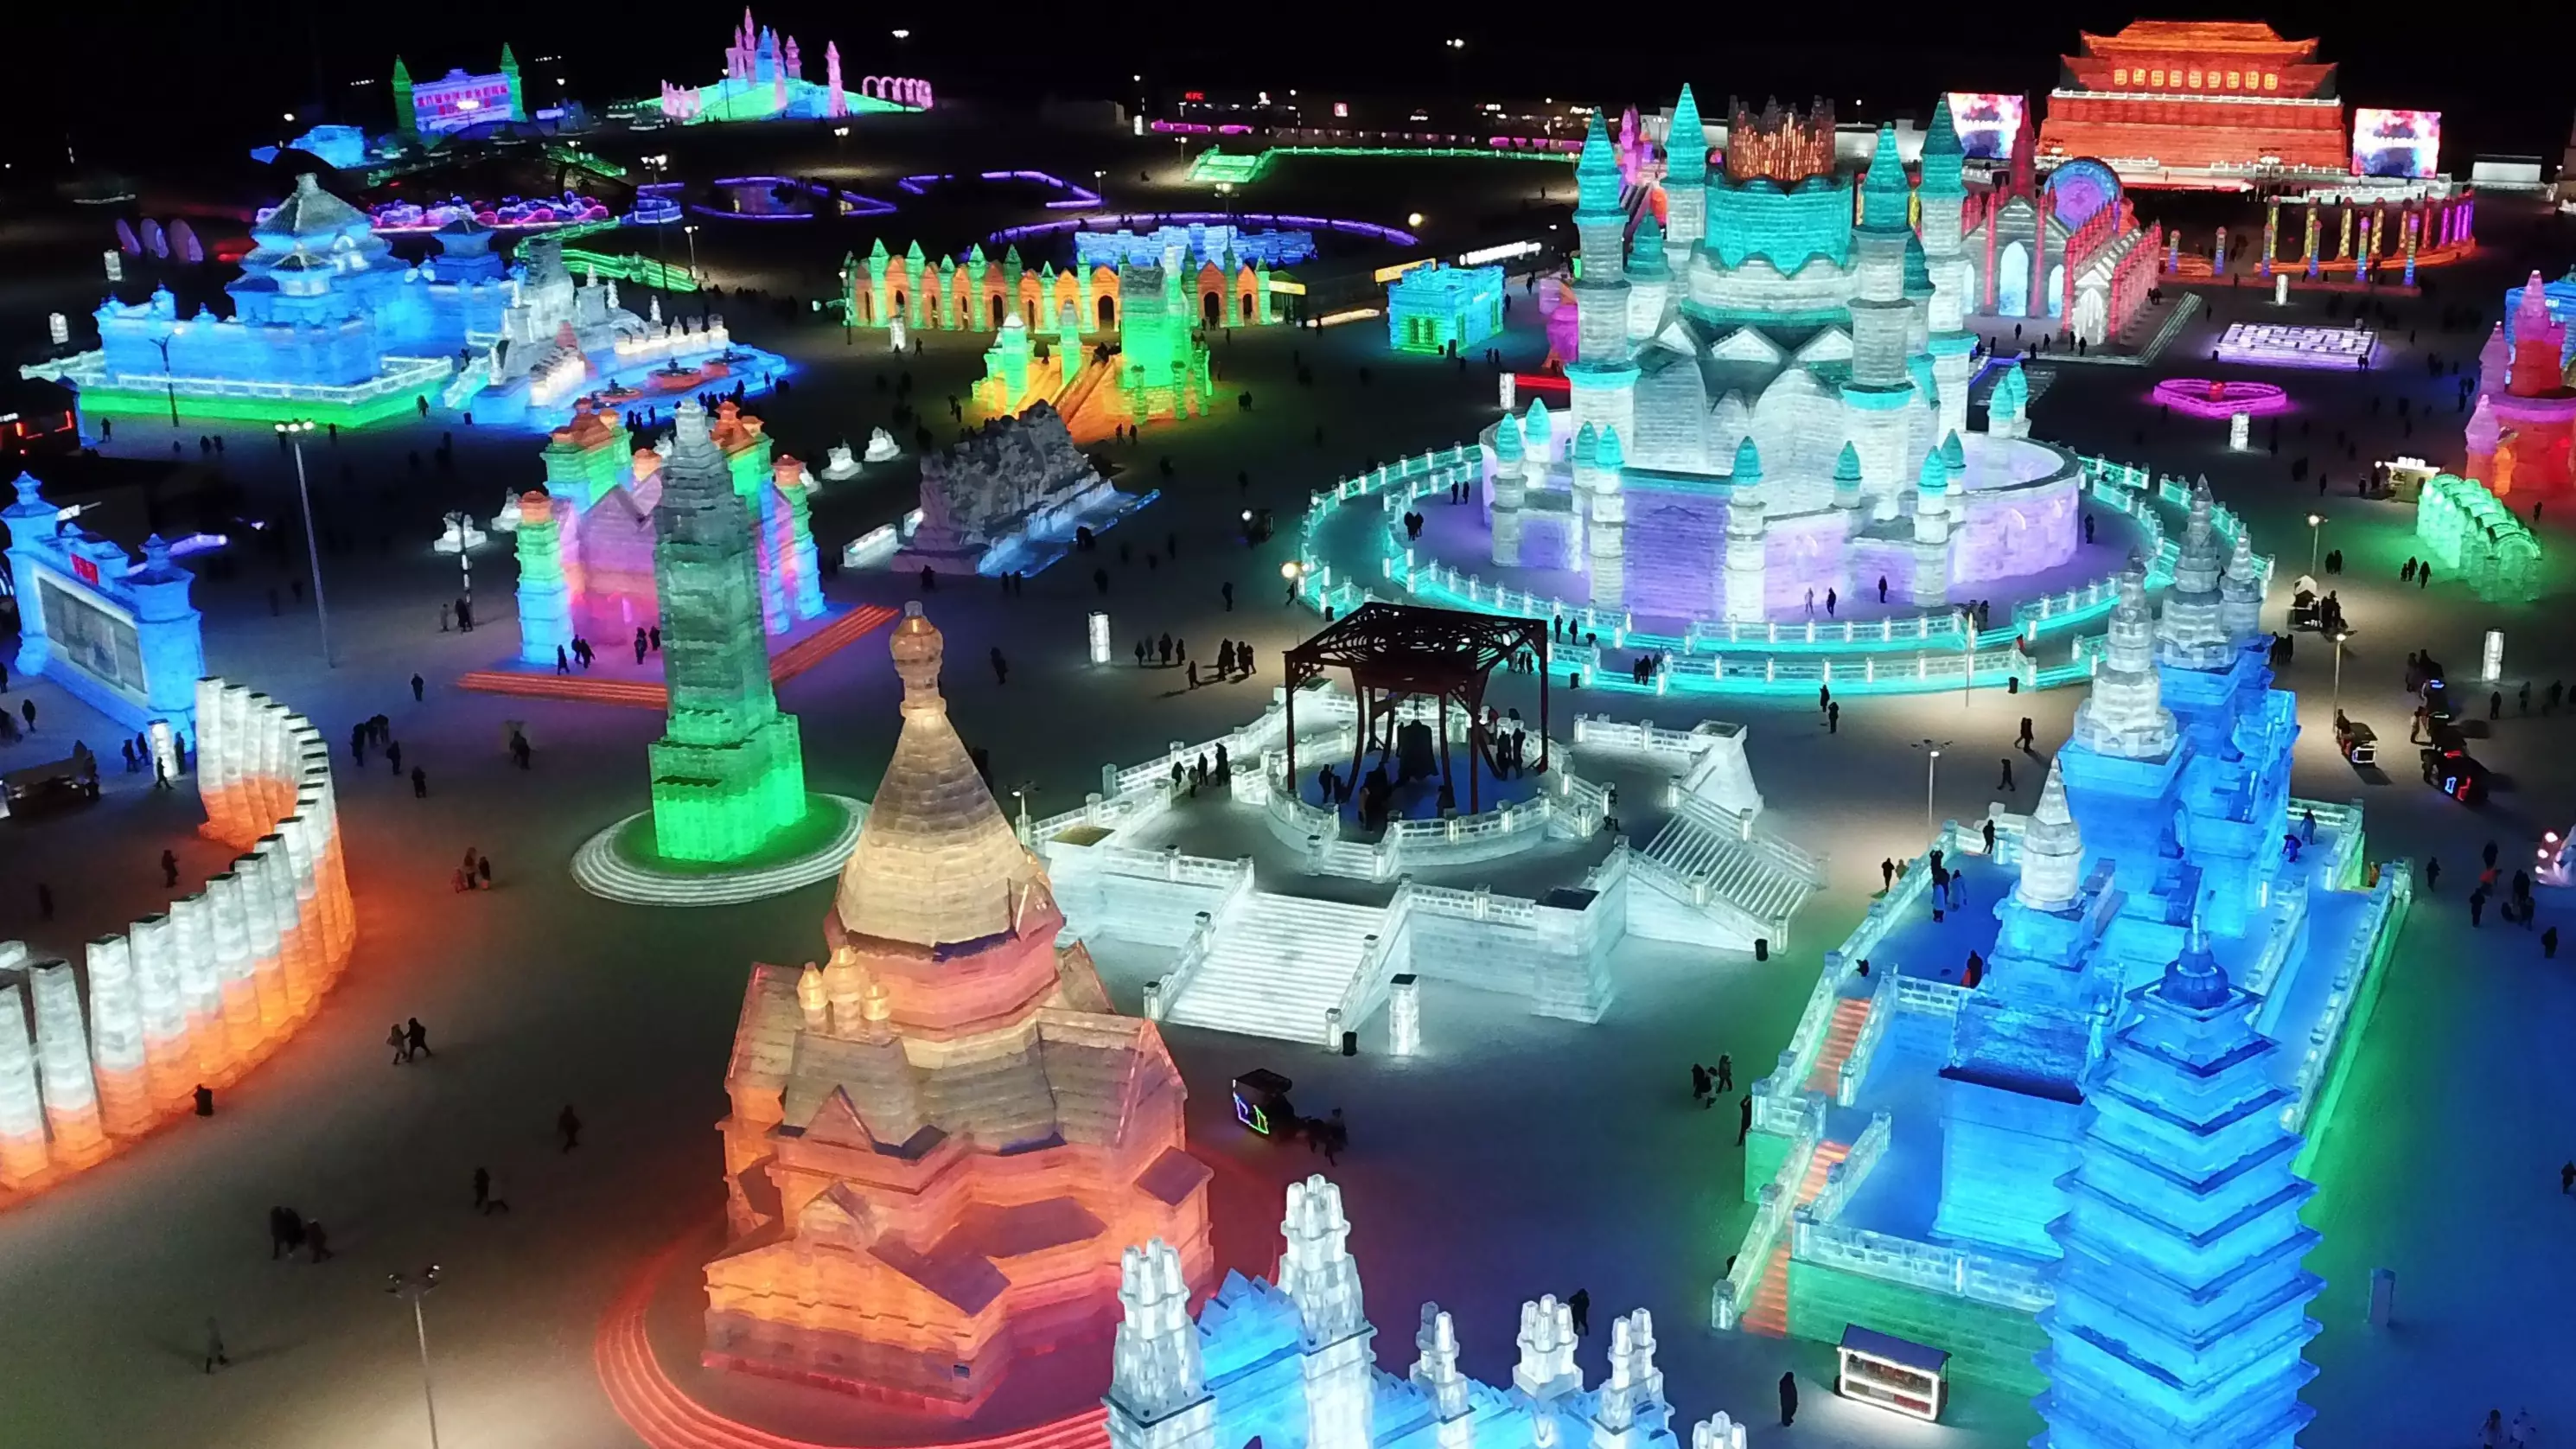 This Breathtaking Snow And Ice Festival Looks Magical